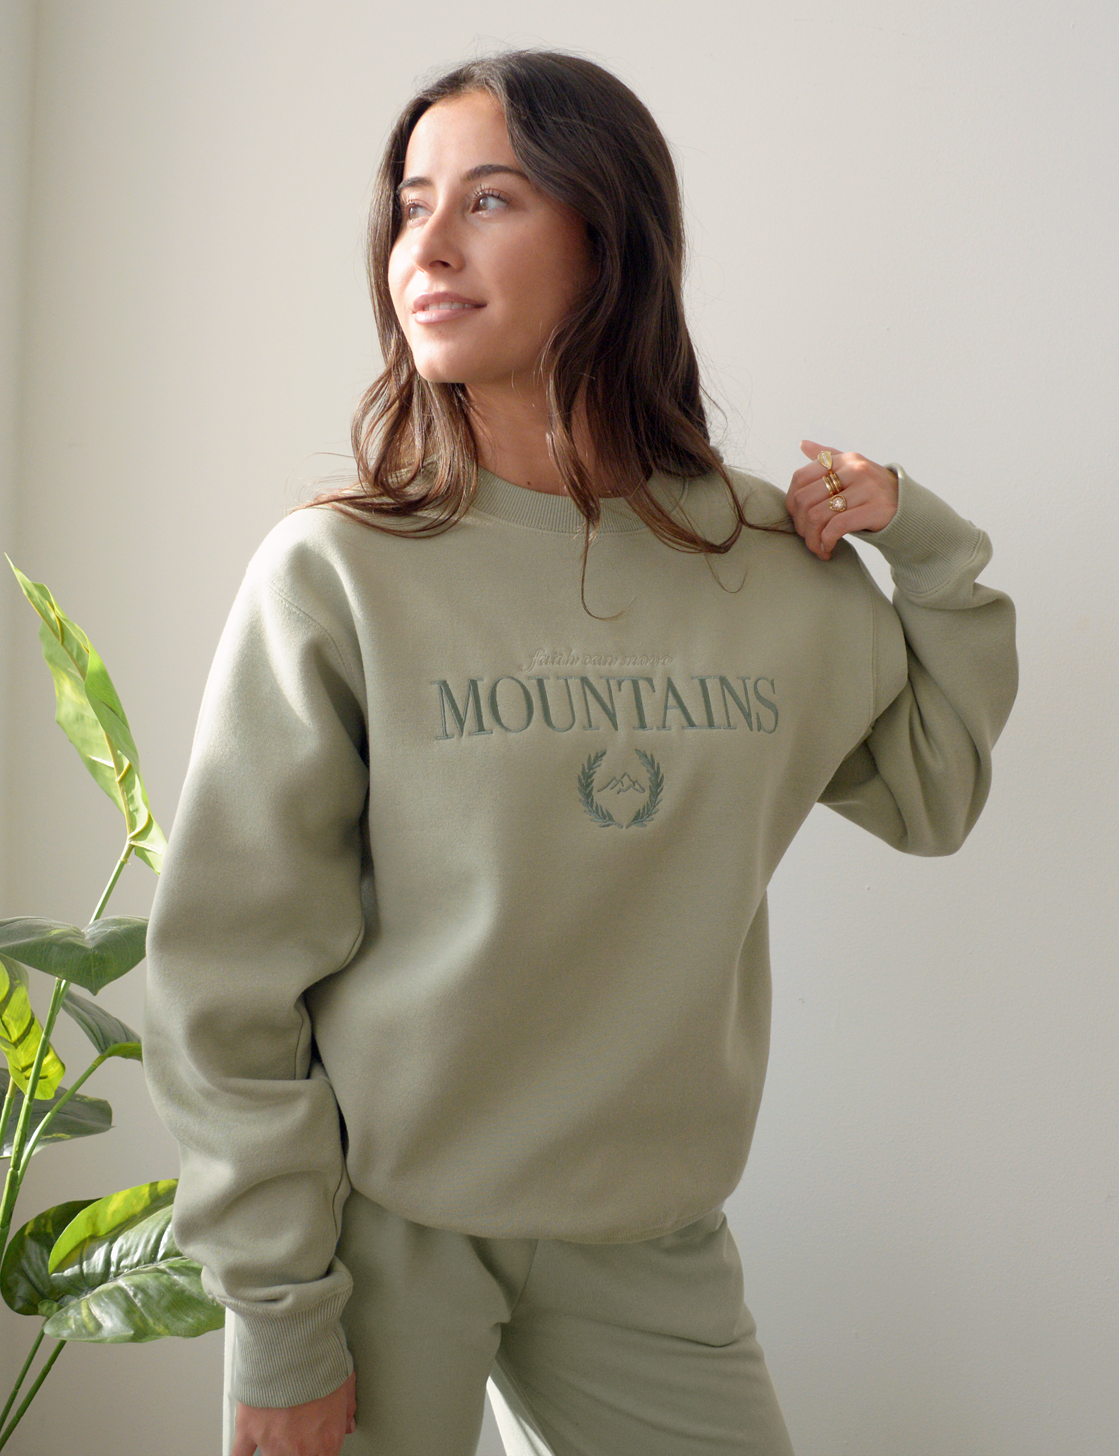 Faith Can Move Mountains Embroidered Sweatshirt